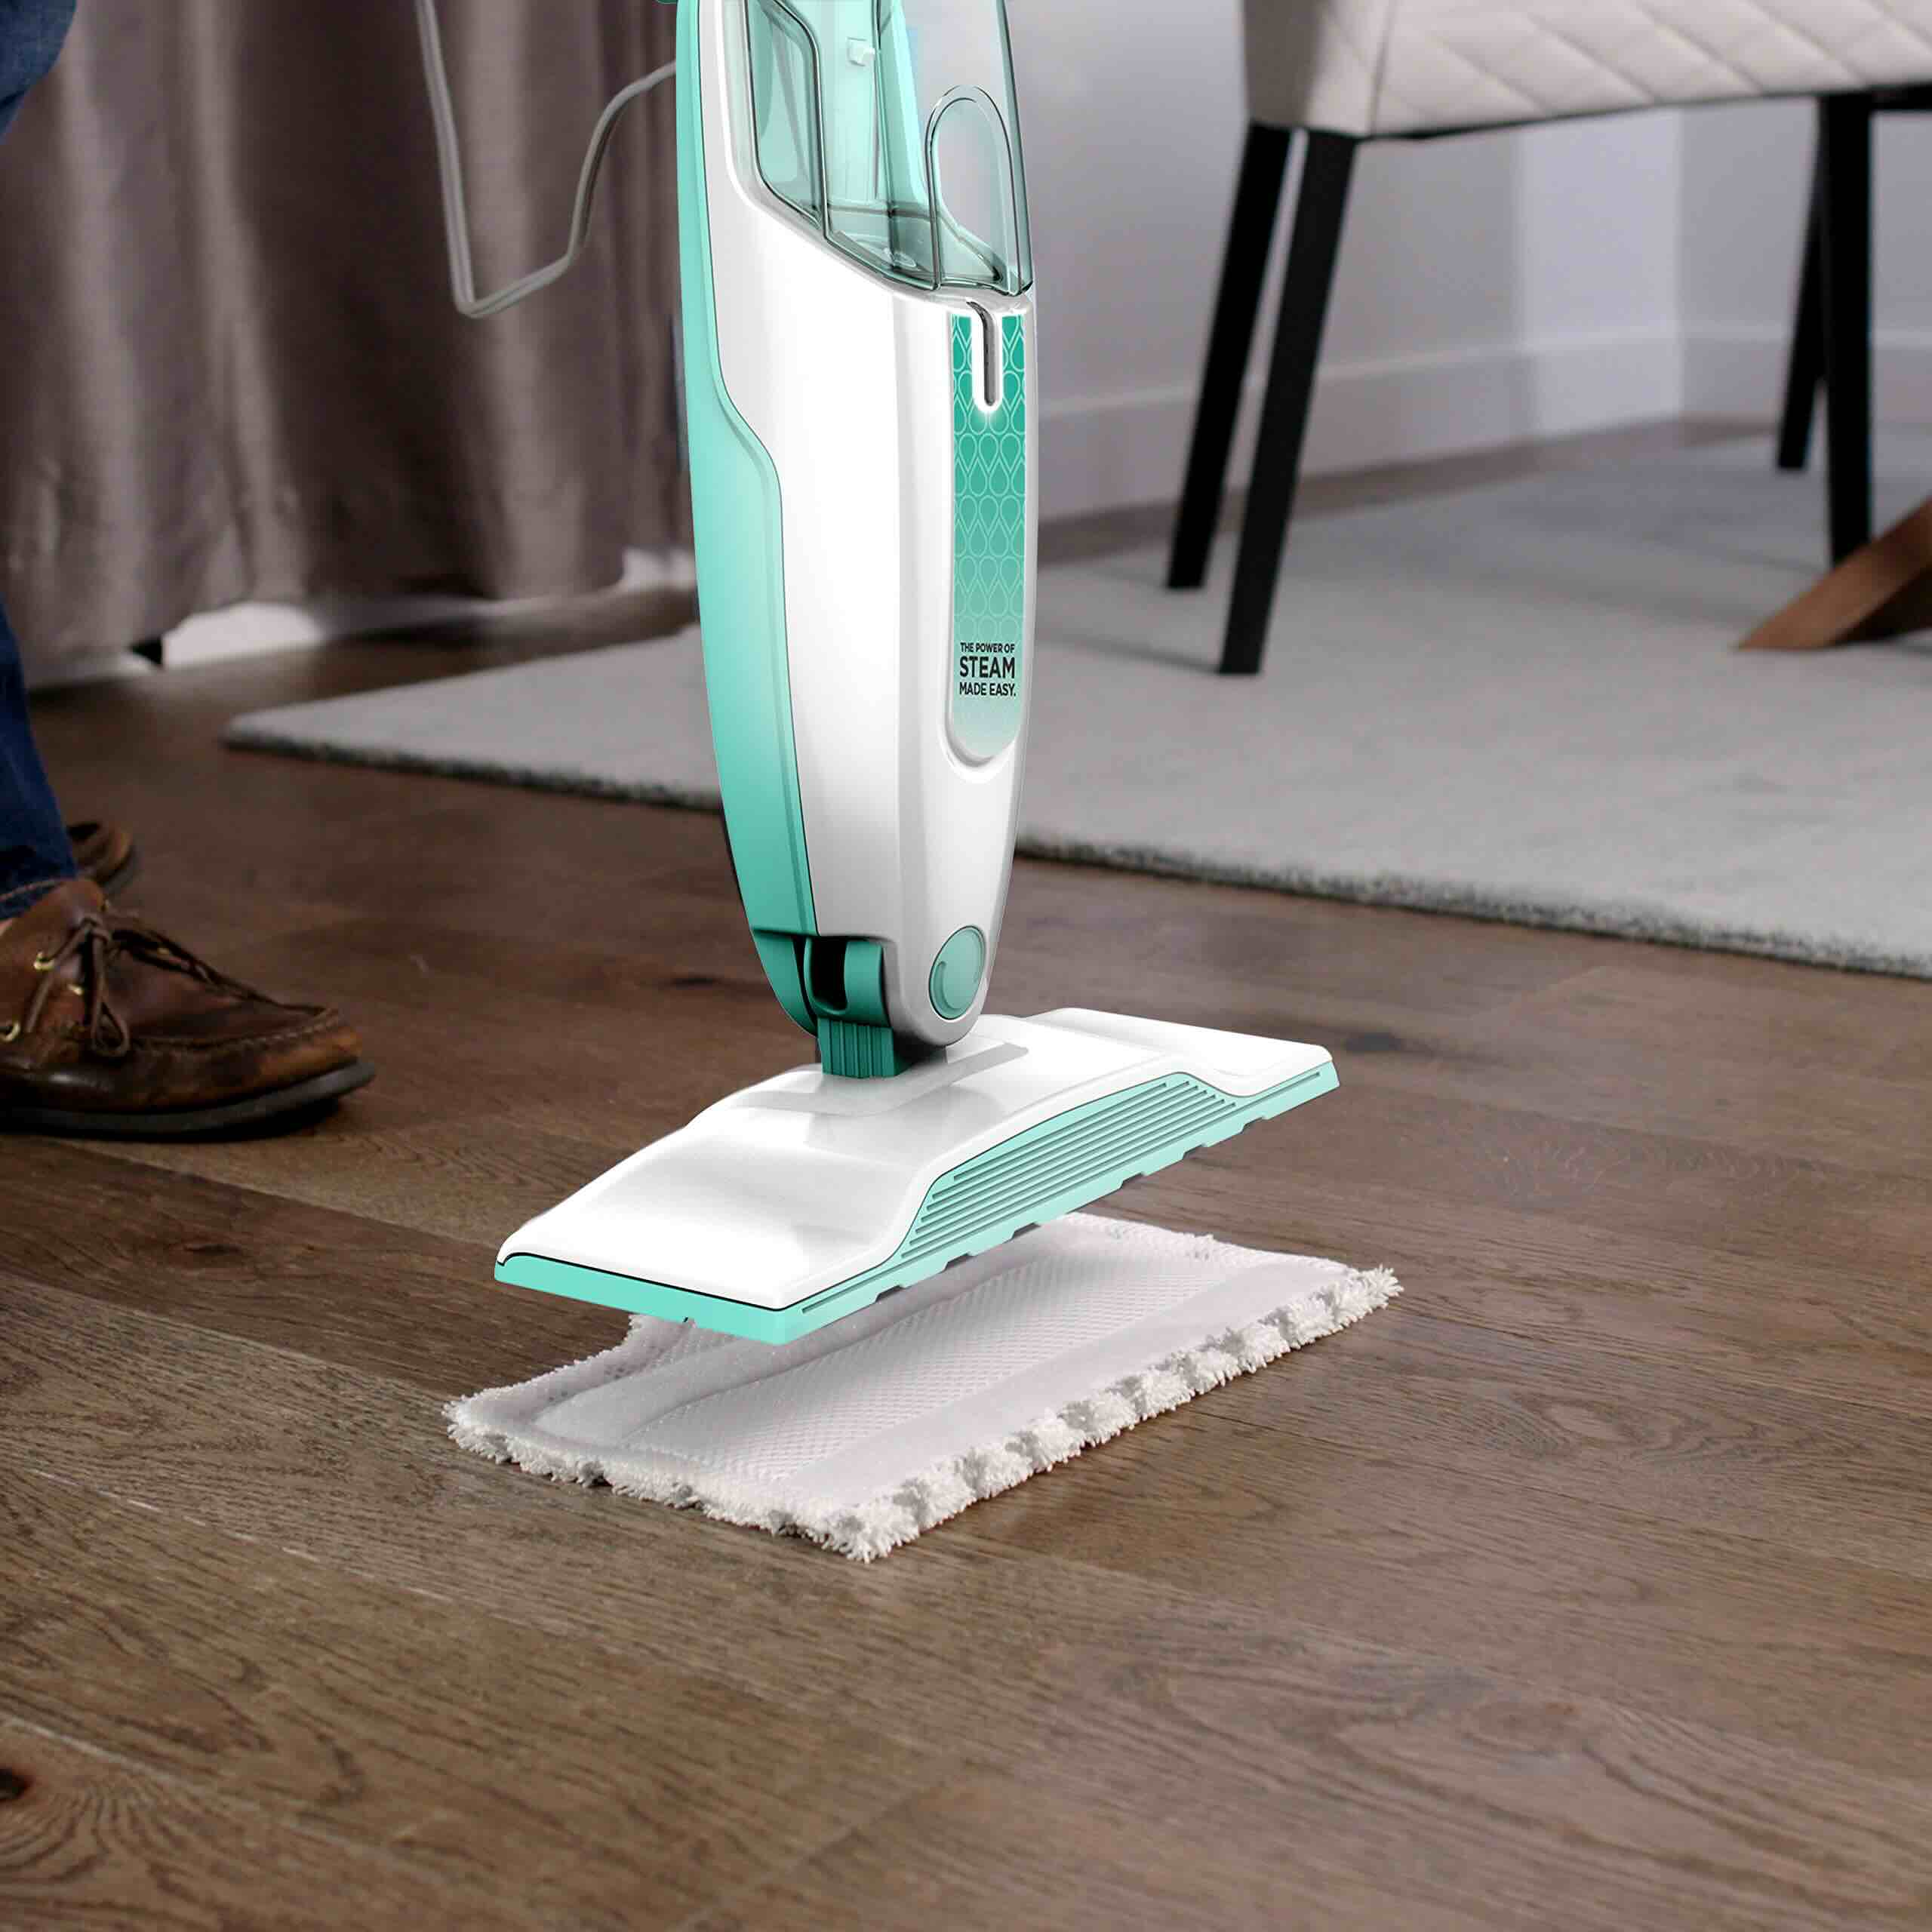 Floormate Deluxe Hard Floor Cleaner Review: Cleaning Perfection for Your Hard  Floors! 